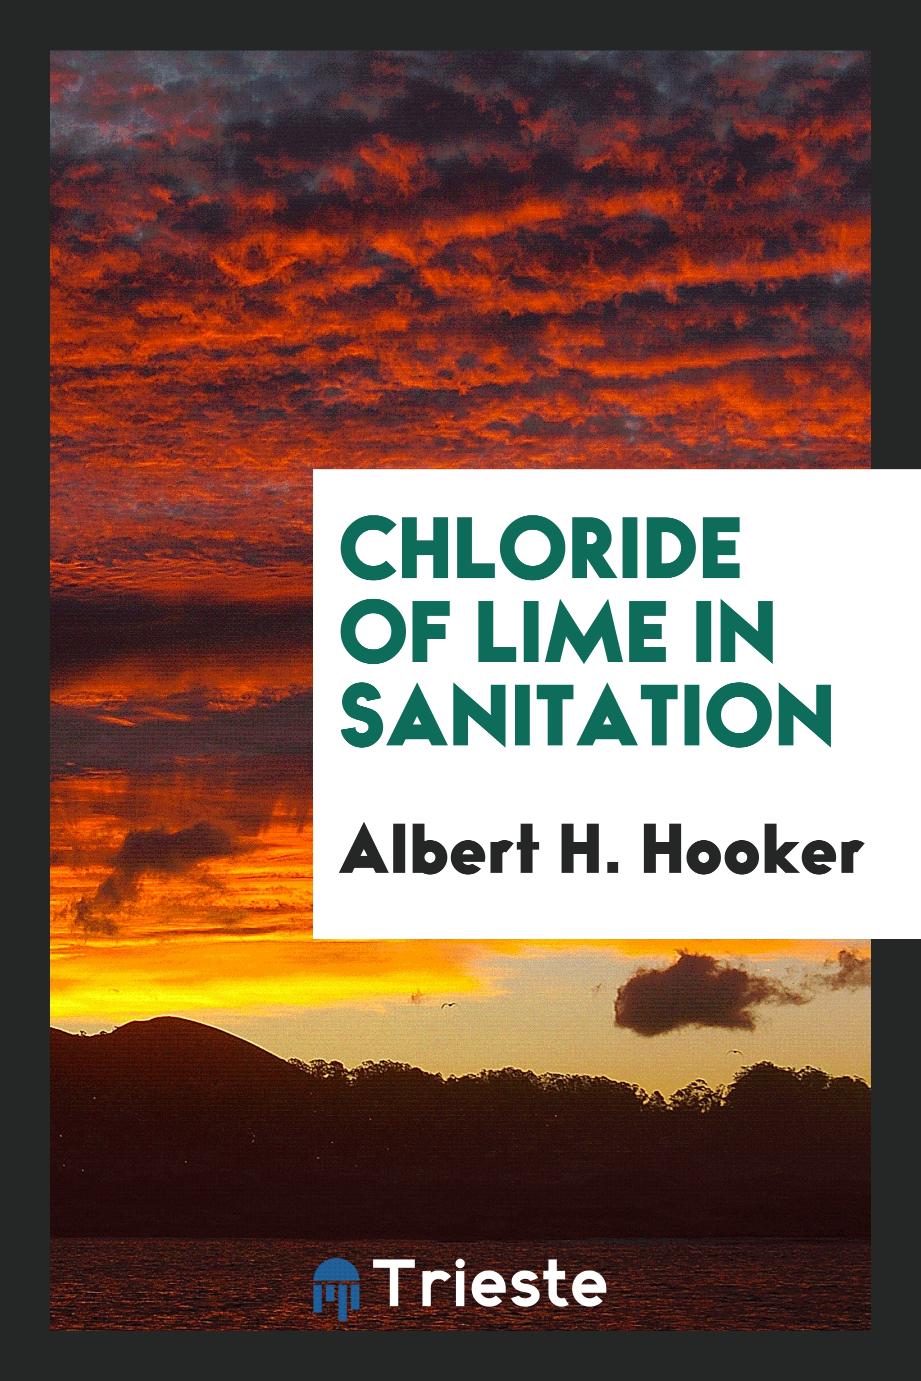 Chloride of Lime in Sanitation